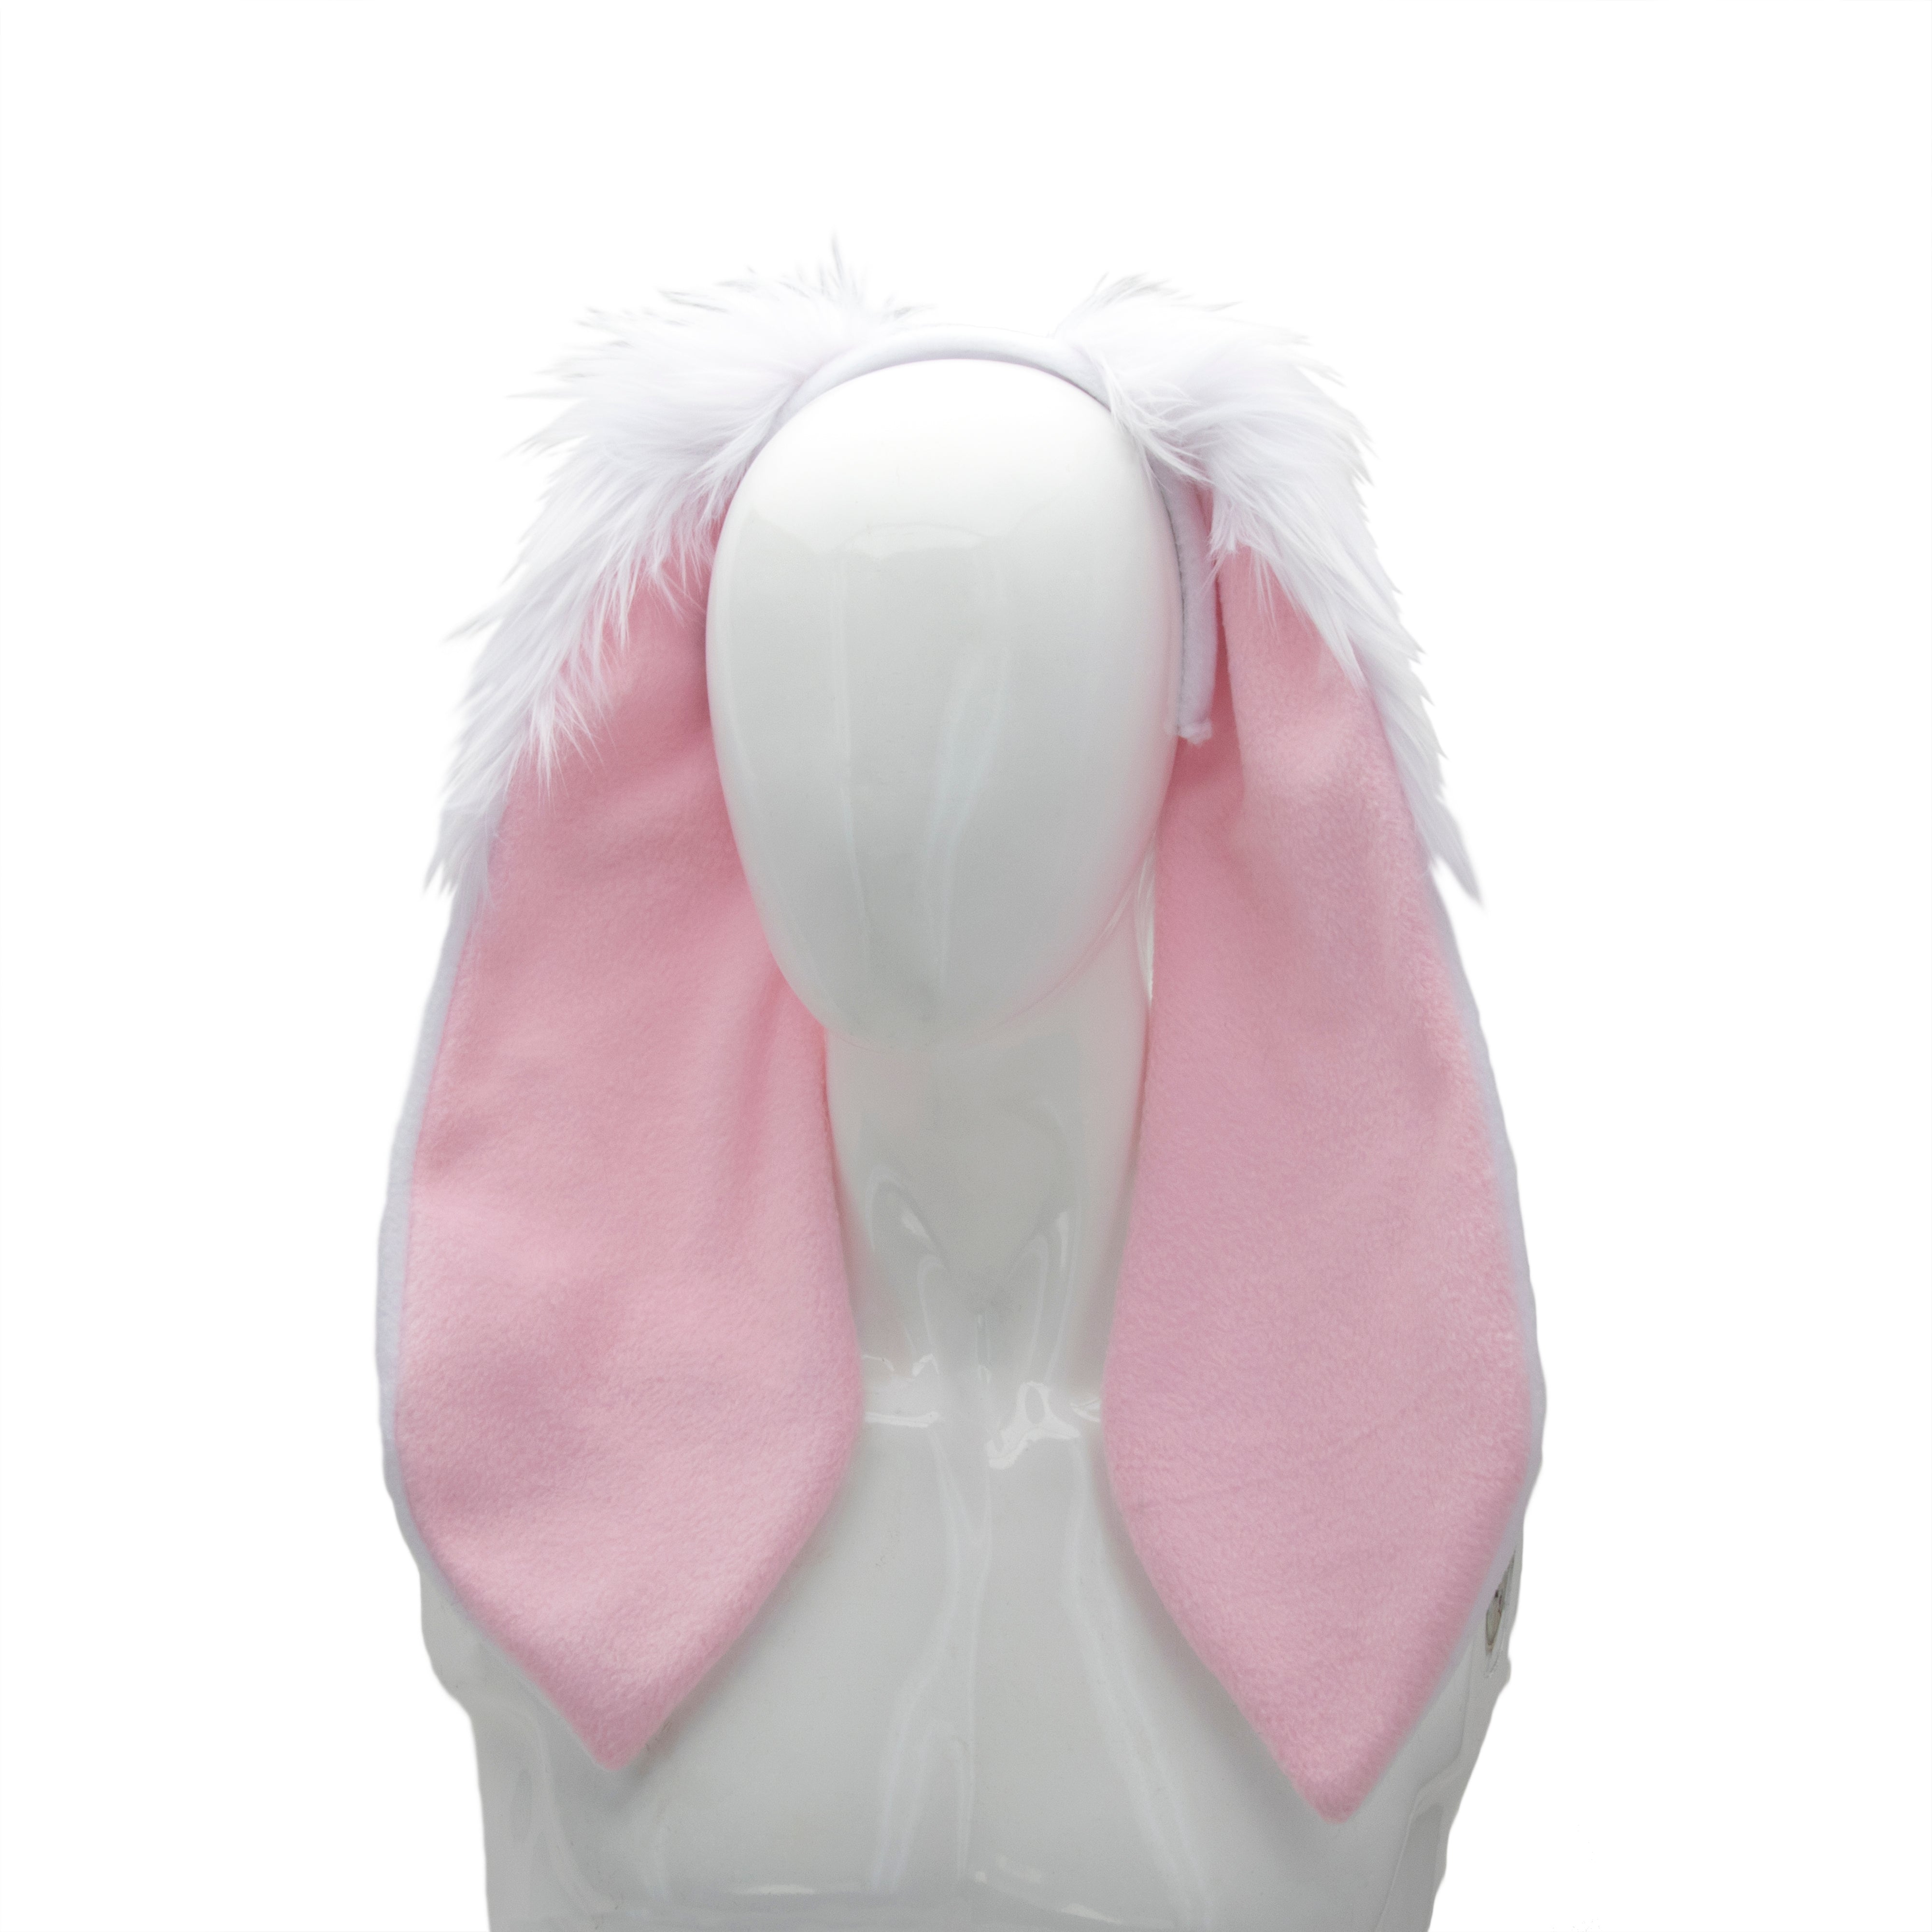 Pawstar Classic Floppy Bunny Rabbit Headband easter bugs judy hopps furry fluffy partial fursuit halloween costume or cosplay accessory white